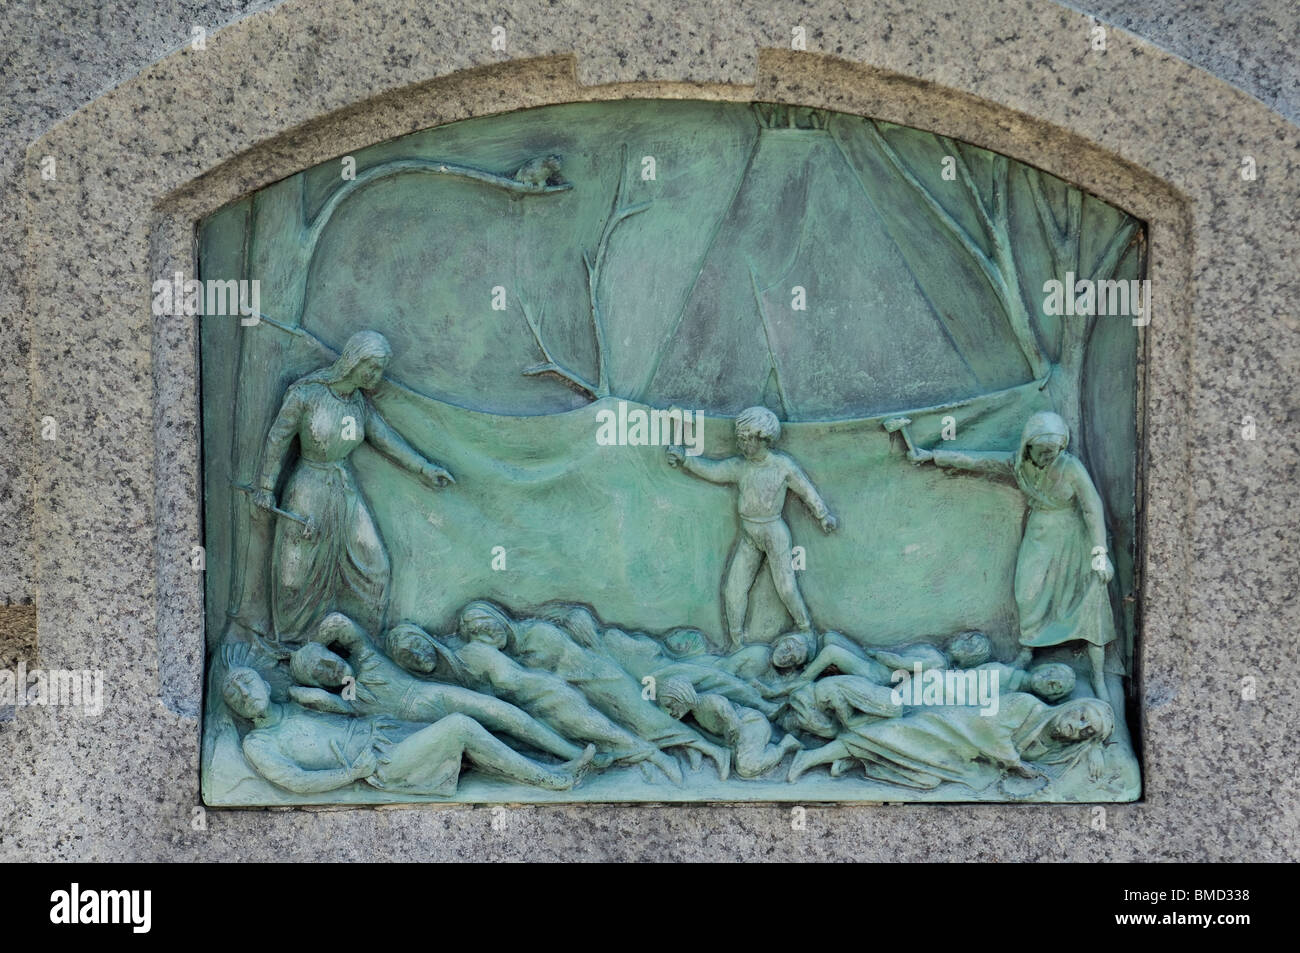 Hannah Duston killing Indians who kidnapped them, bas-relief on a memorial in Haverhill, Massachusetts. Digital photograph Stock Photo